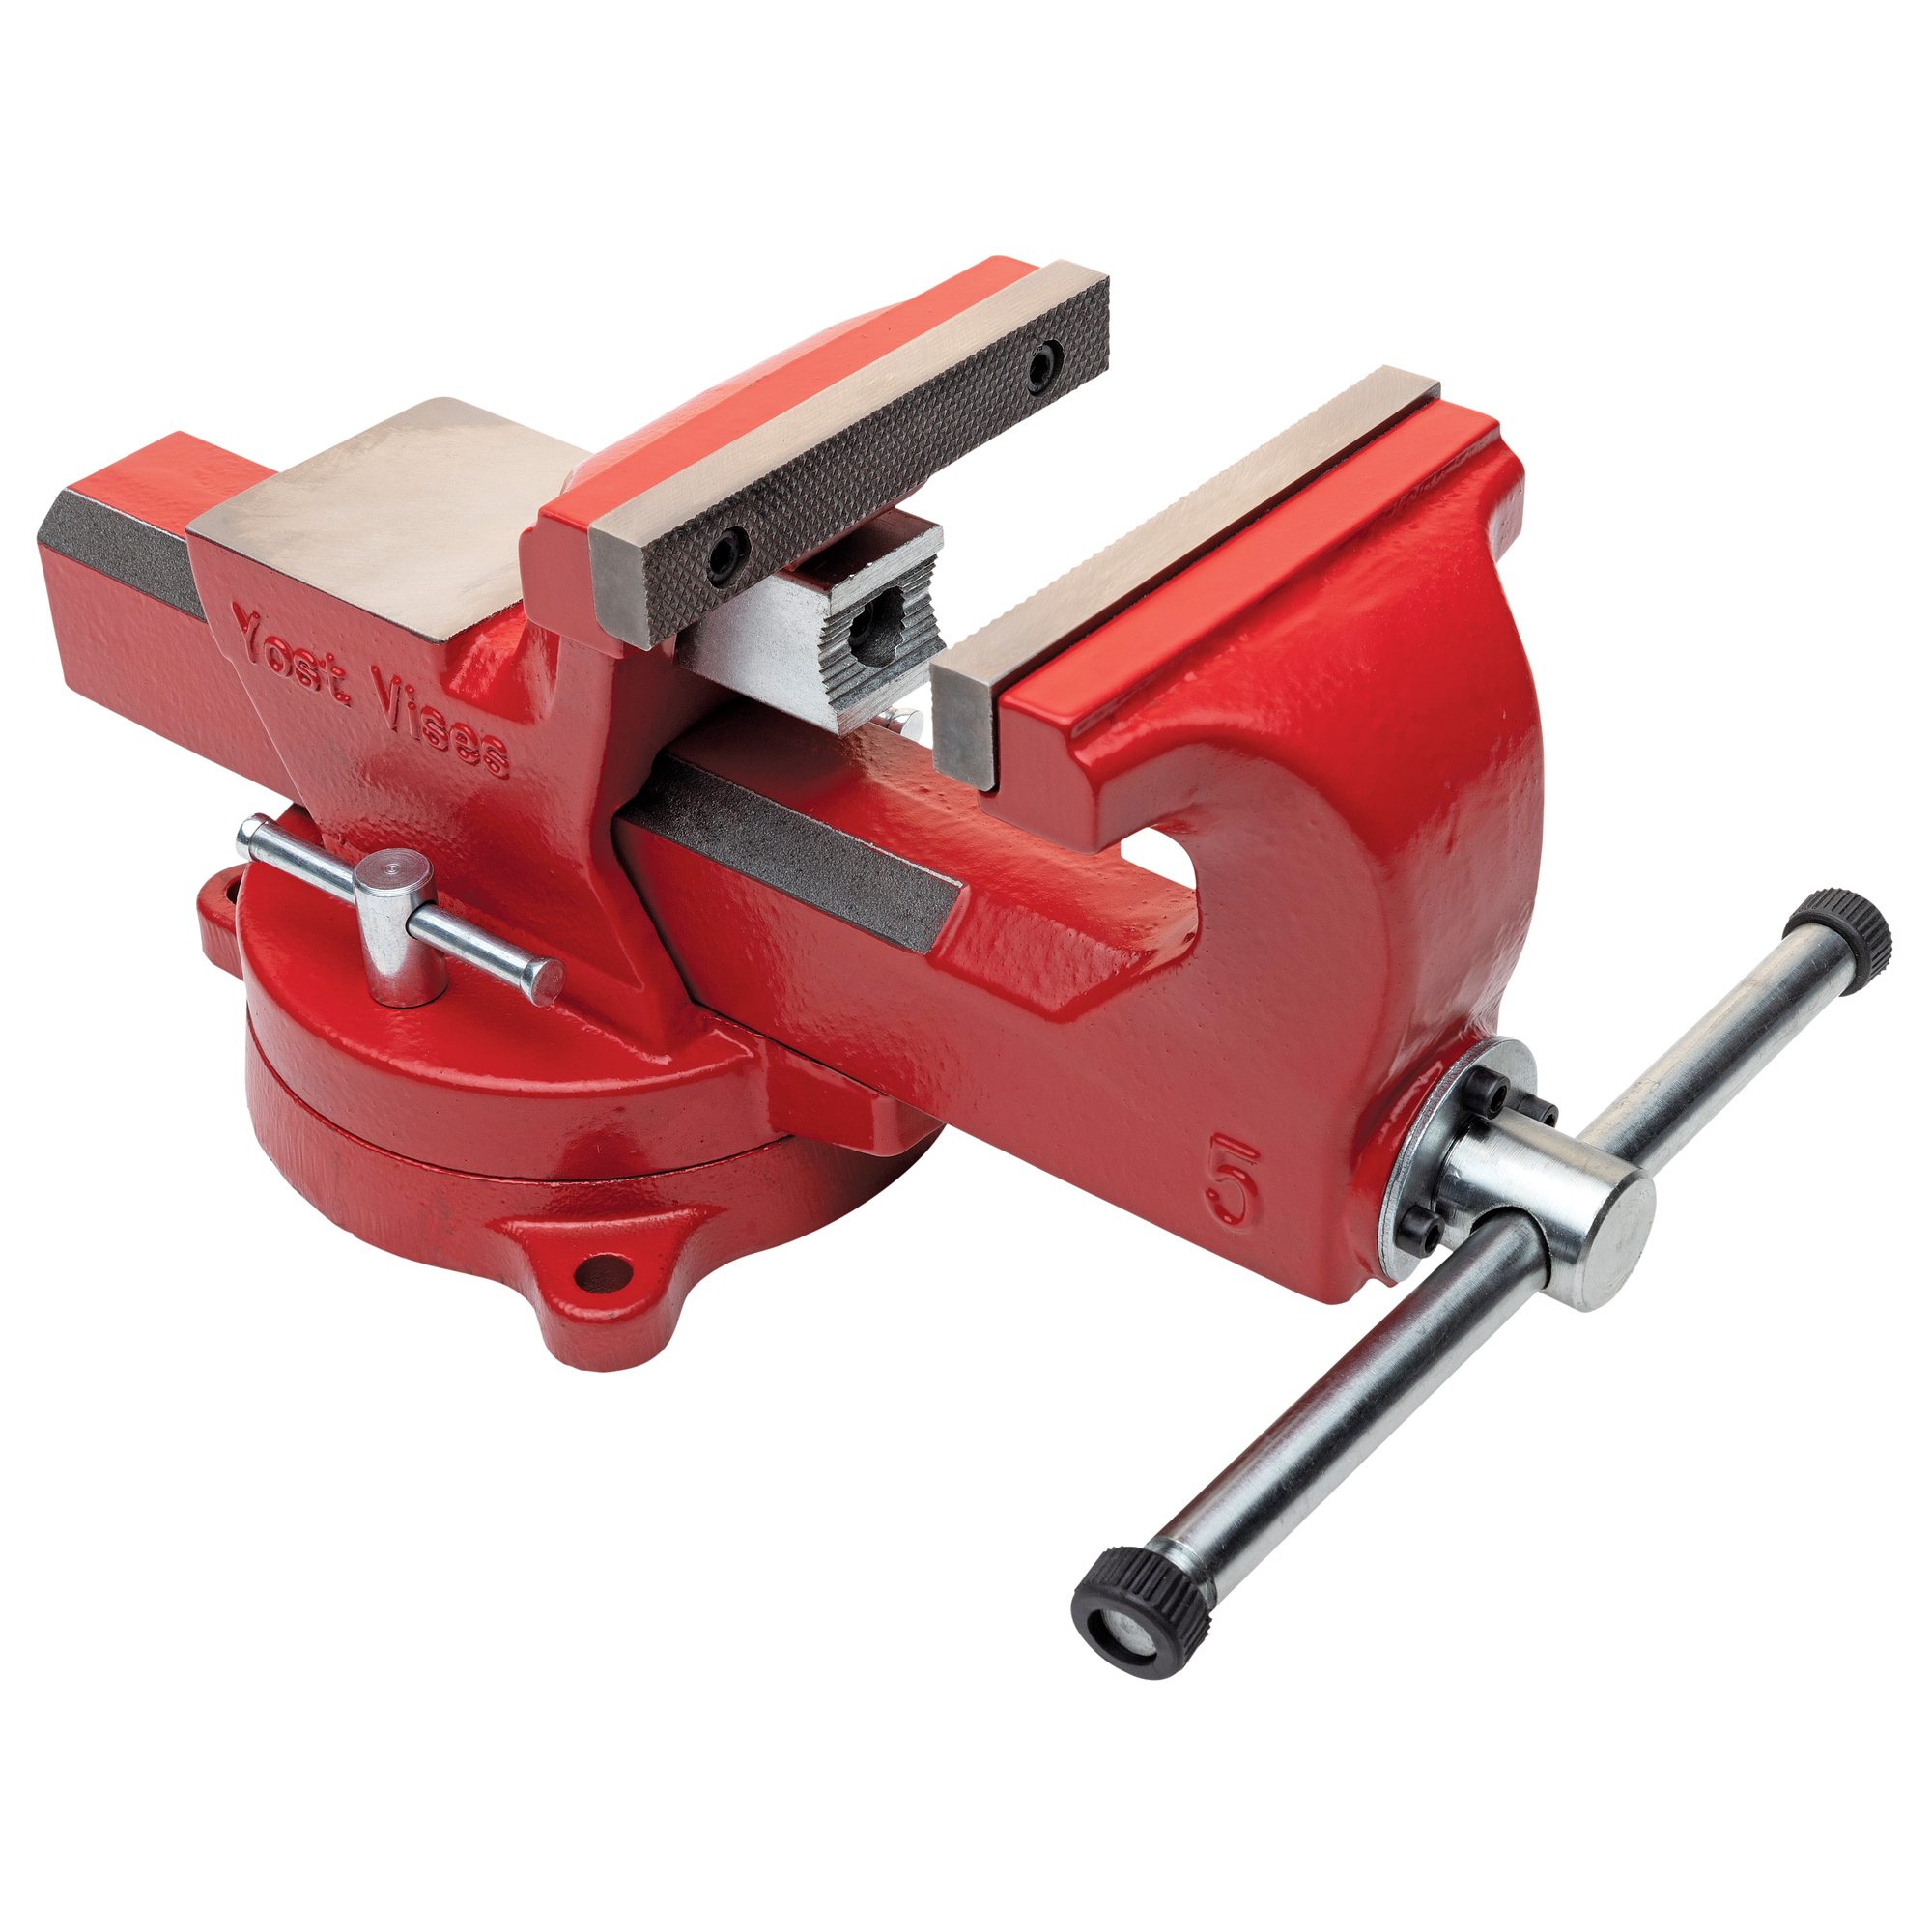 Yost Vises, 5Inch Bench Vise, Jaw Width 5 in, Jaw Capacity 6 in, Material Ductile Iron, Model ADI-5 -  56408